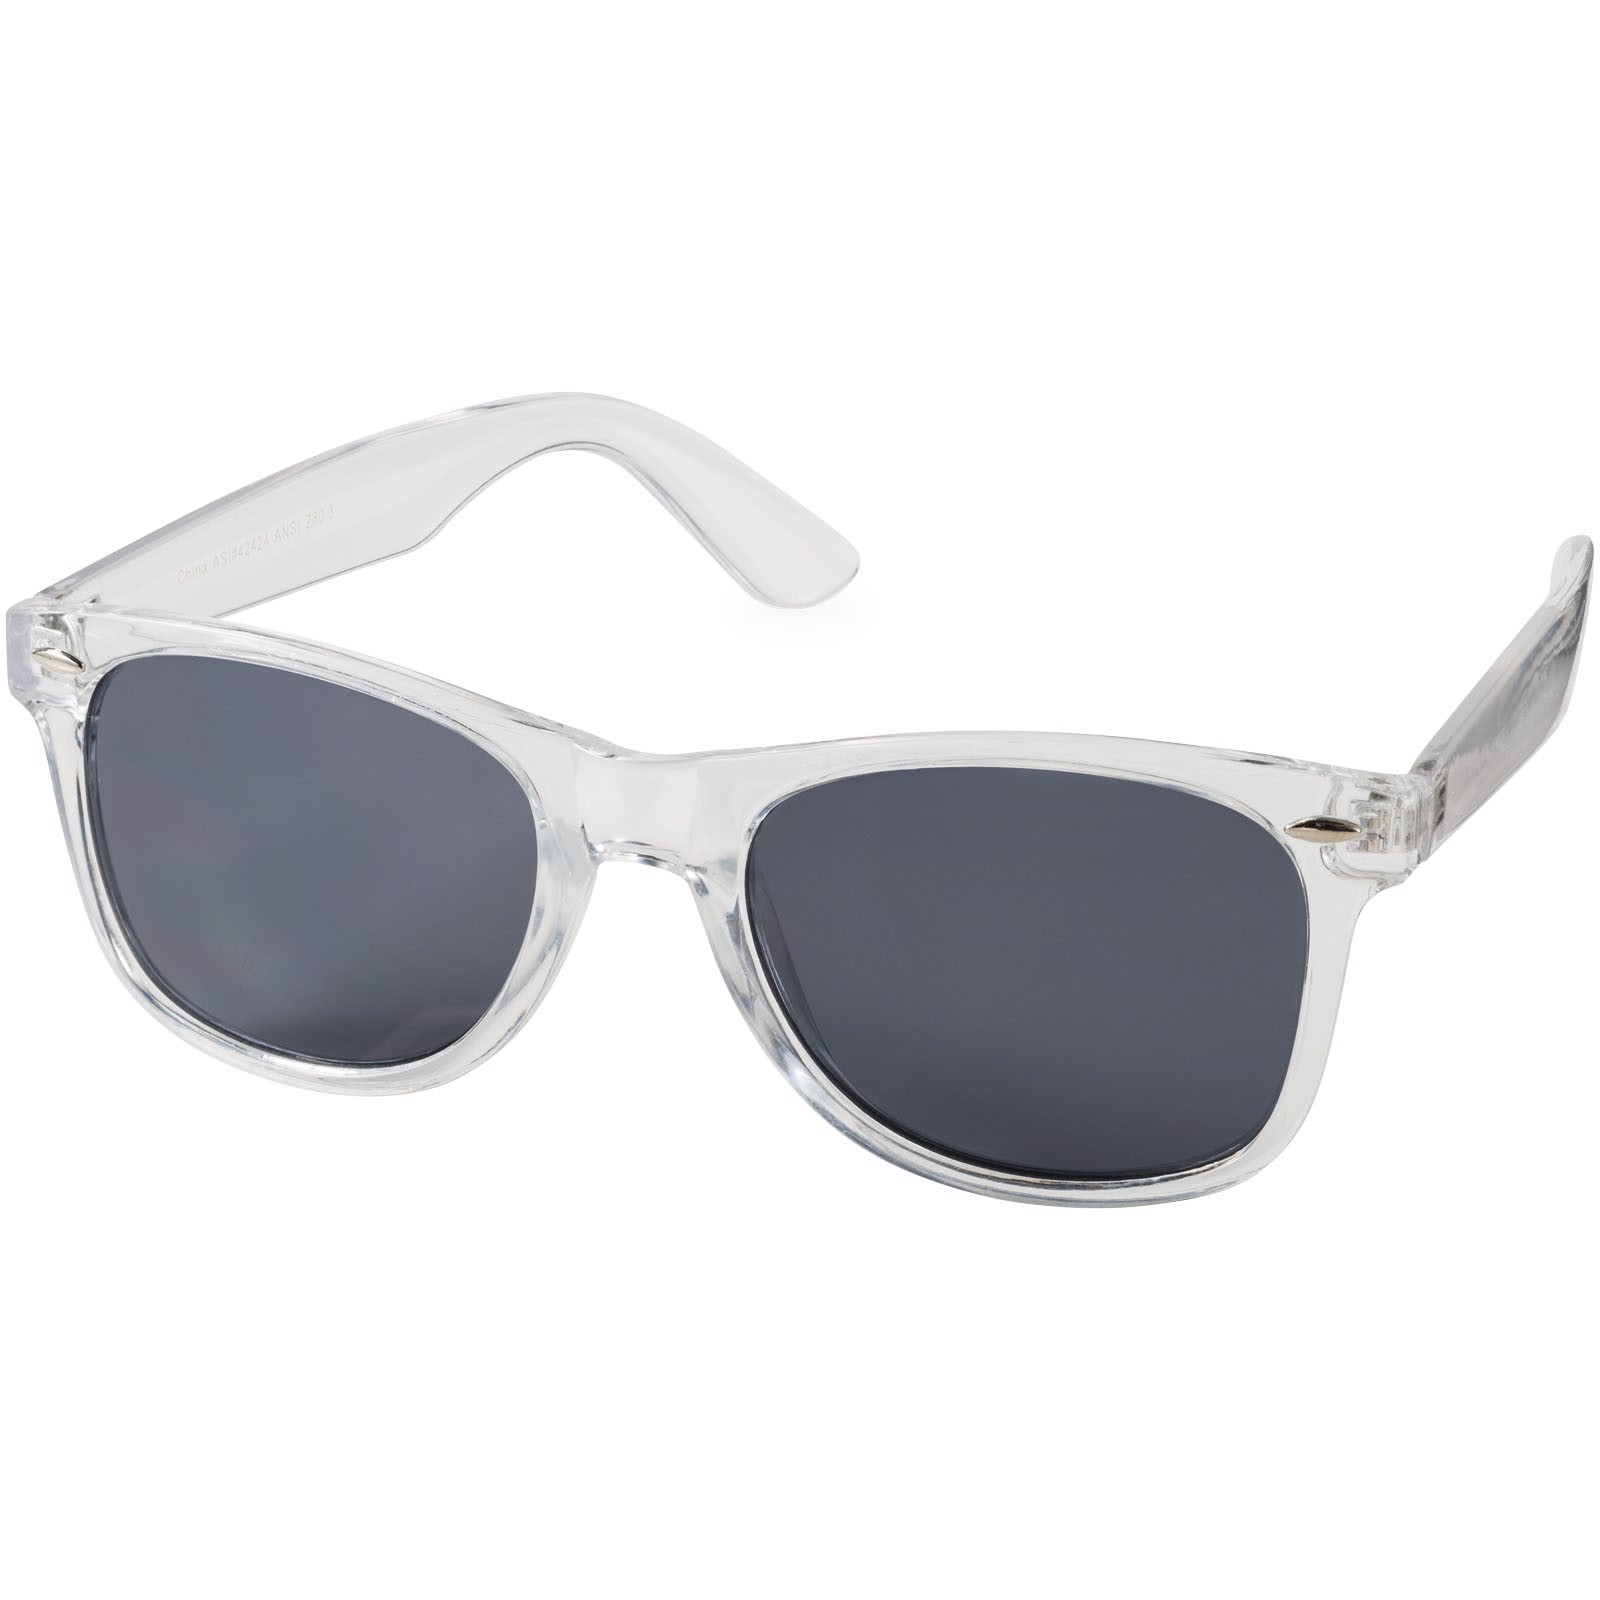 Sun Ray sunglasses with crystal frame - Transparent Clear